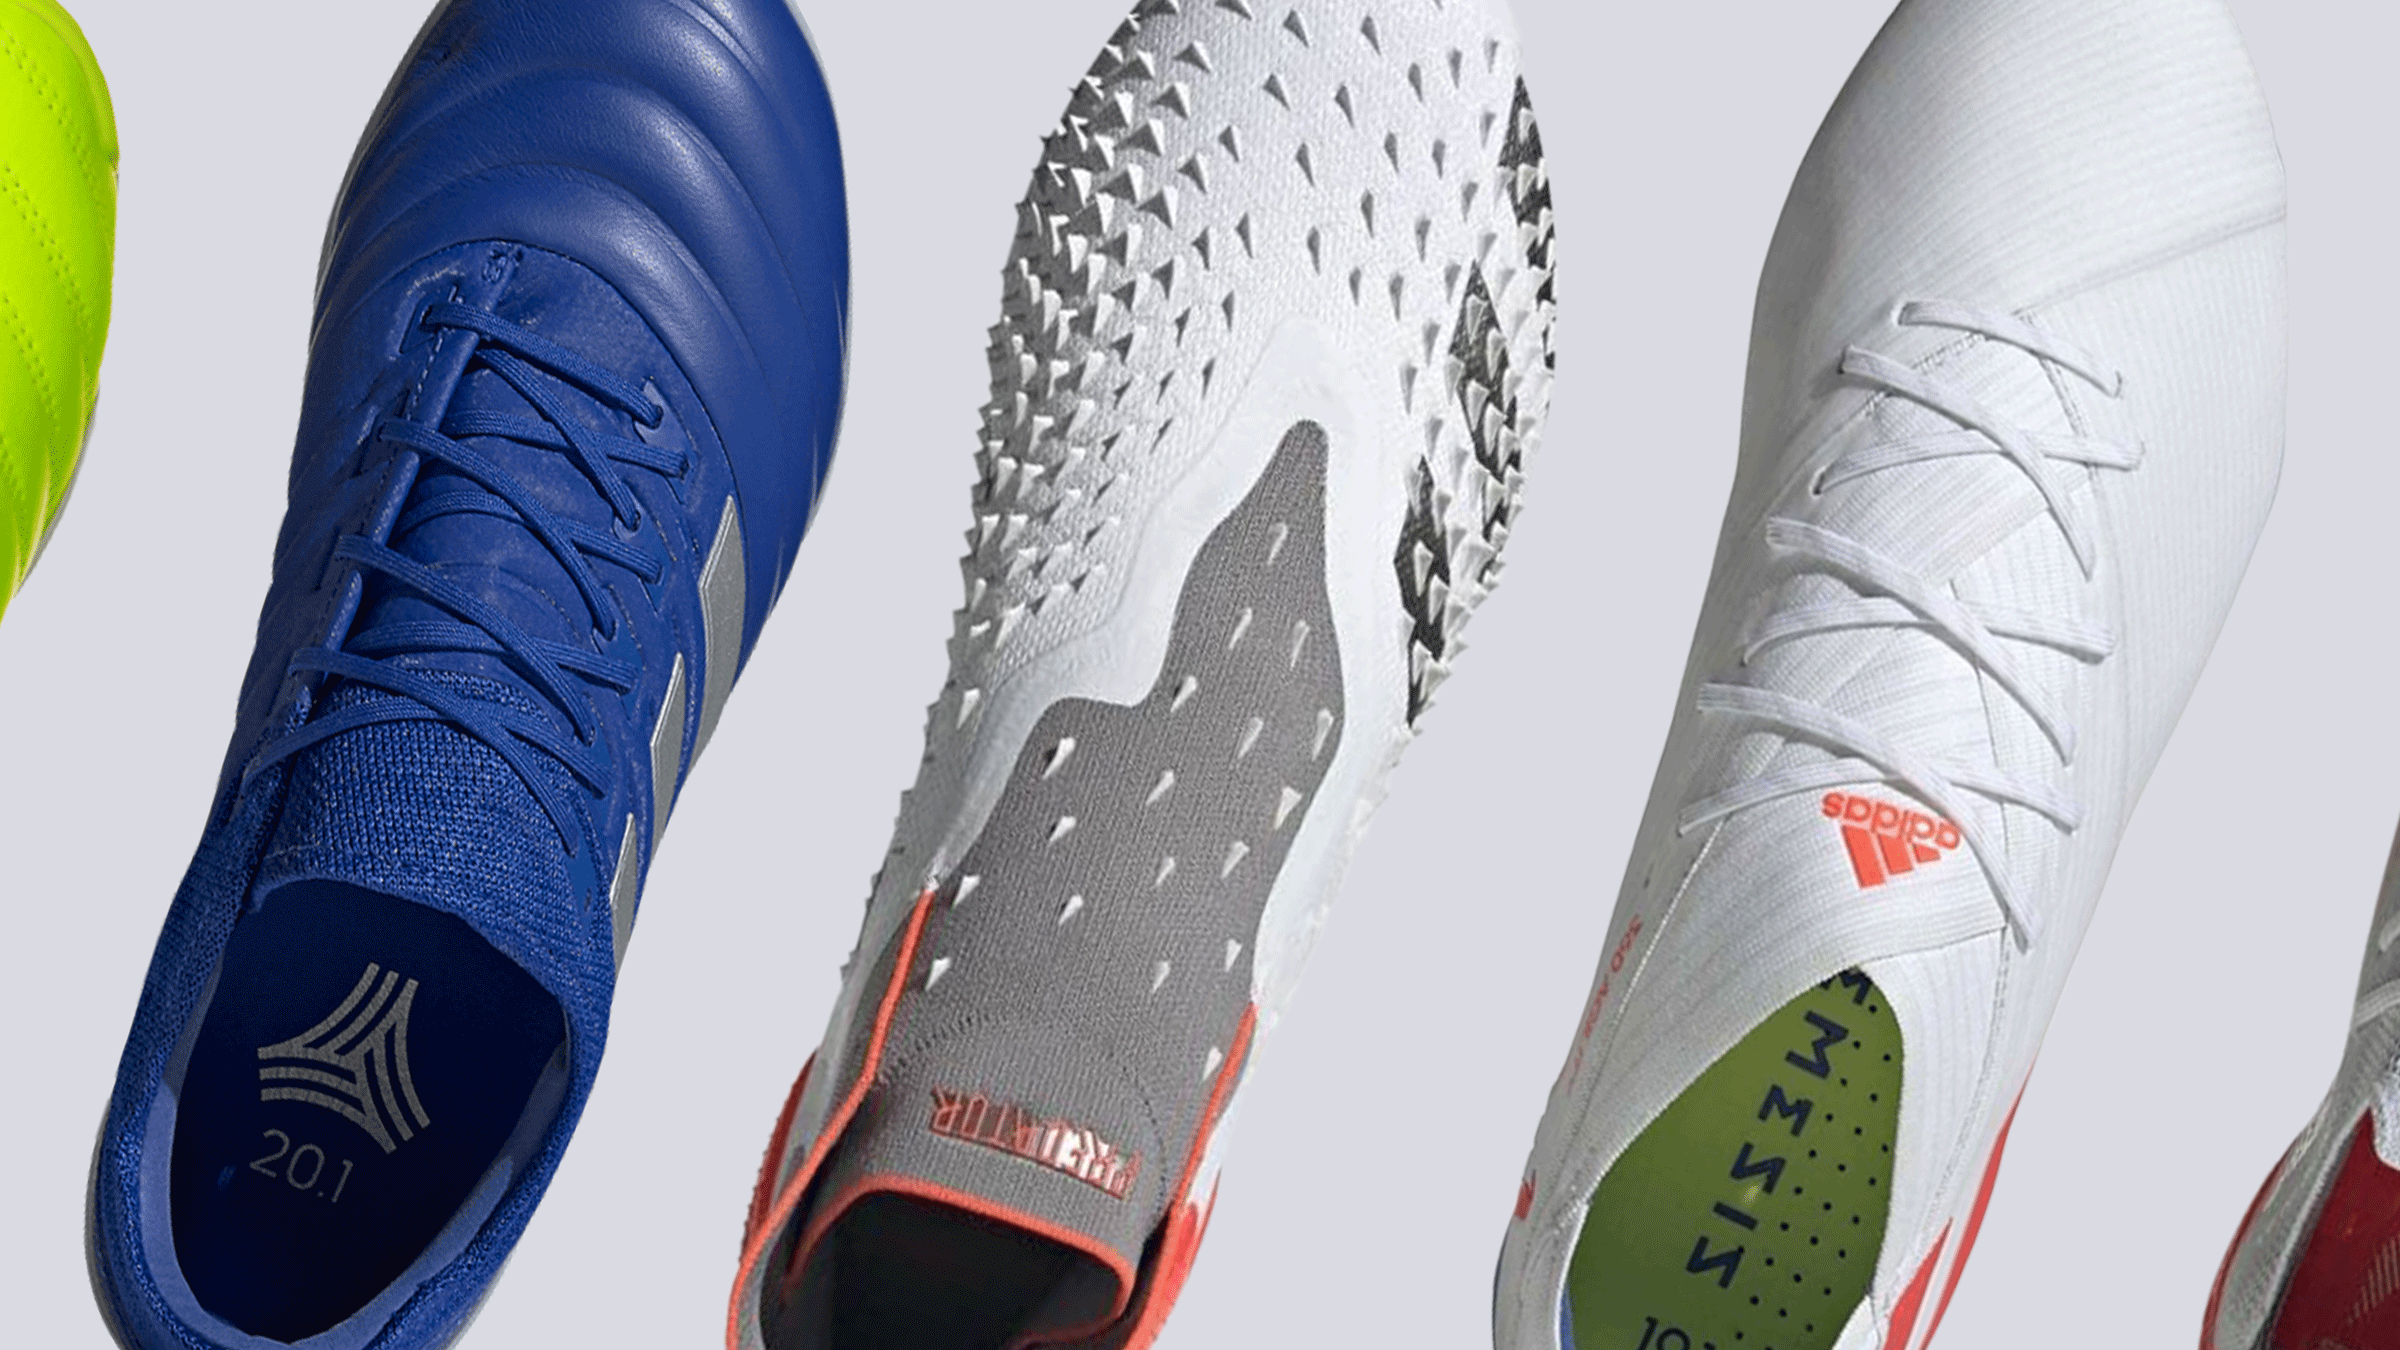 7 Best Adidas Soccer Cleats For Men, 100+ Shoes Tested in 2022